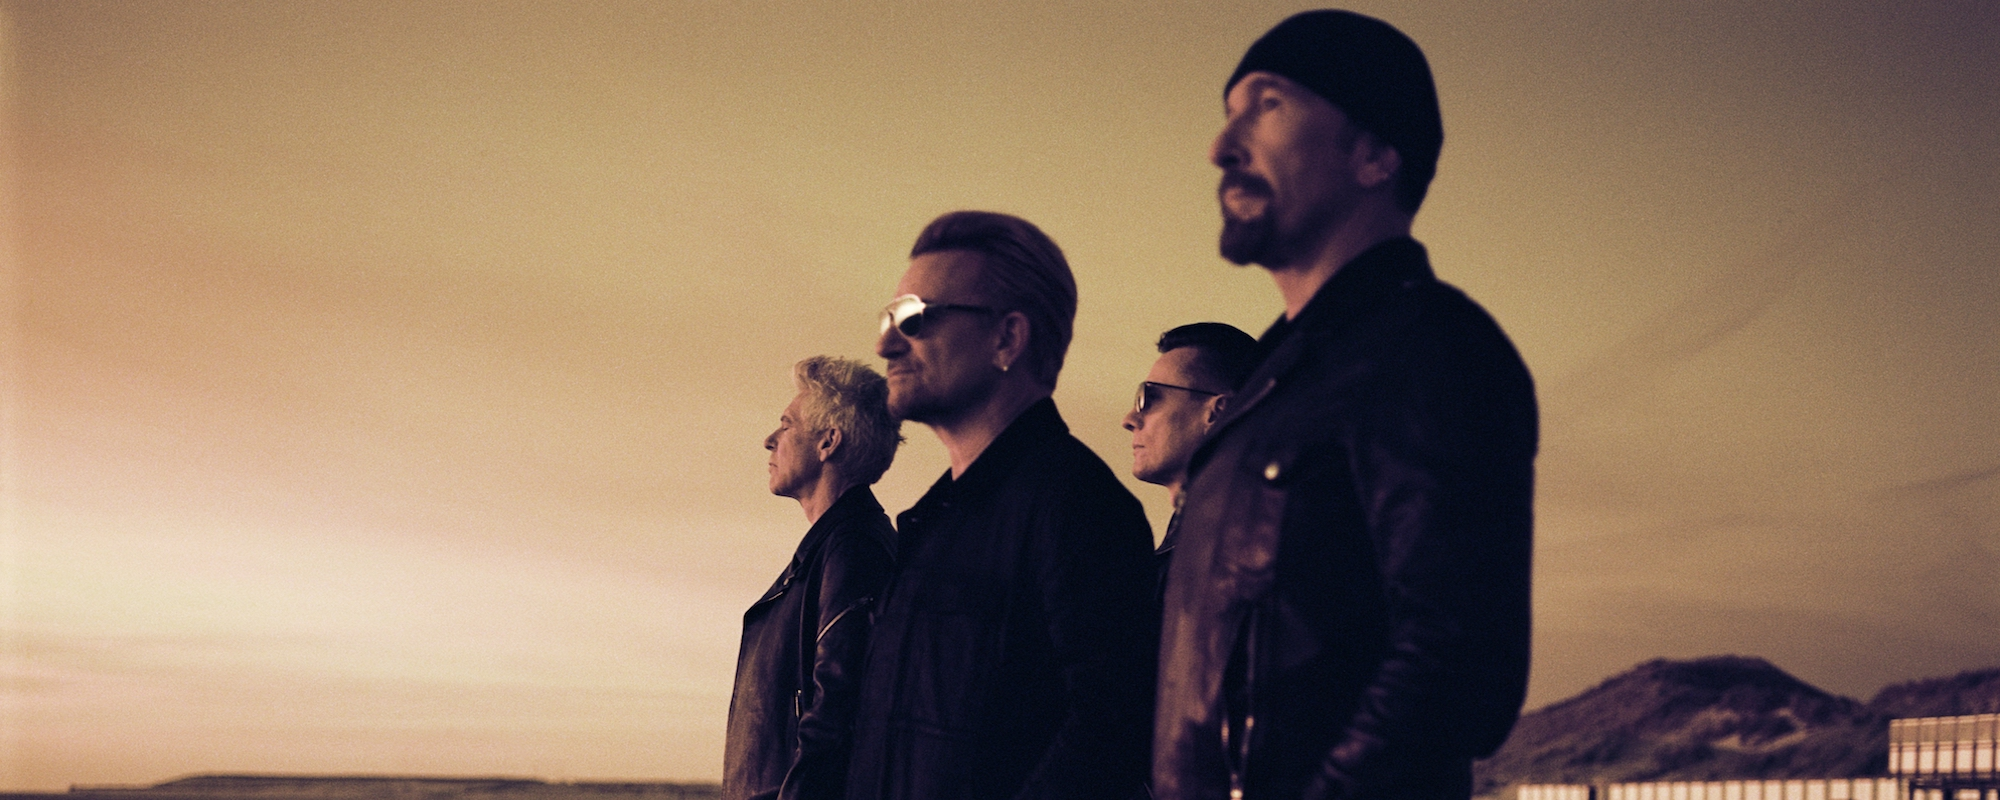 U2 Confirm New Album in the Works, Possibility of ‘Zoo TV Tour’ Return